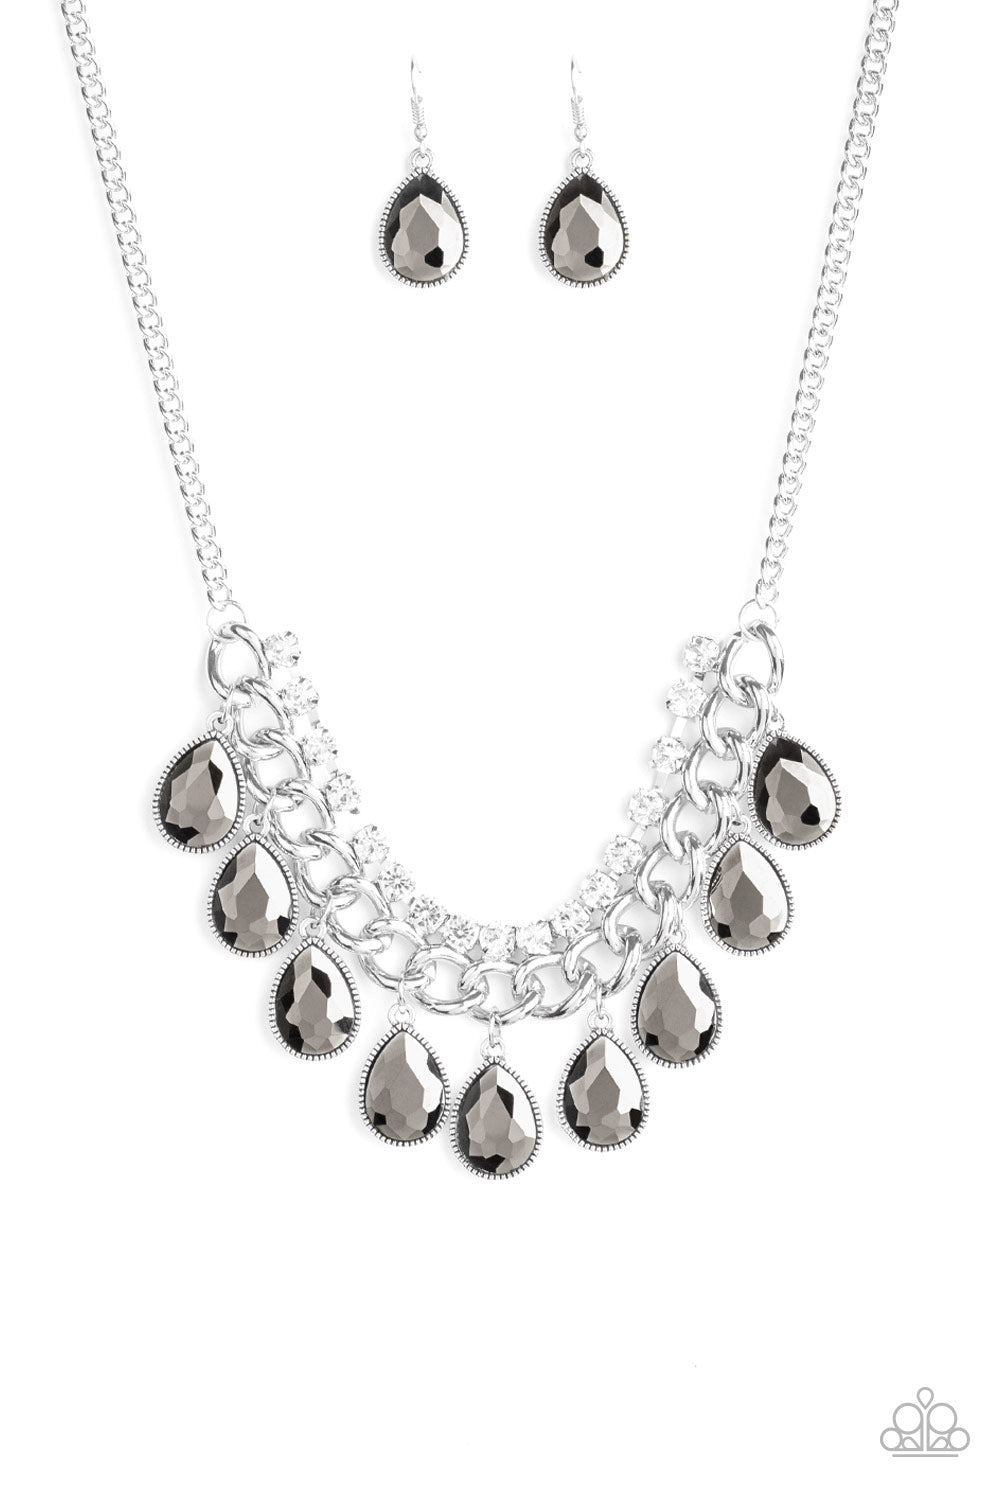 All Toget-HEIR Now Silver Necklace